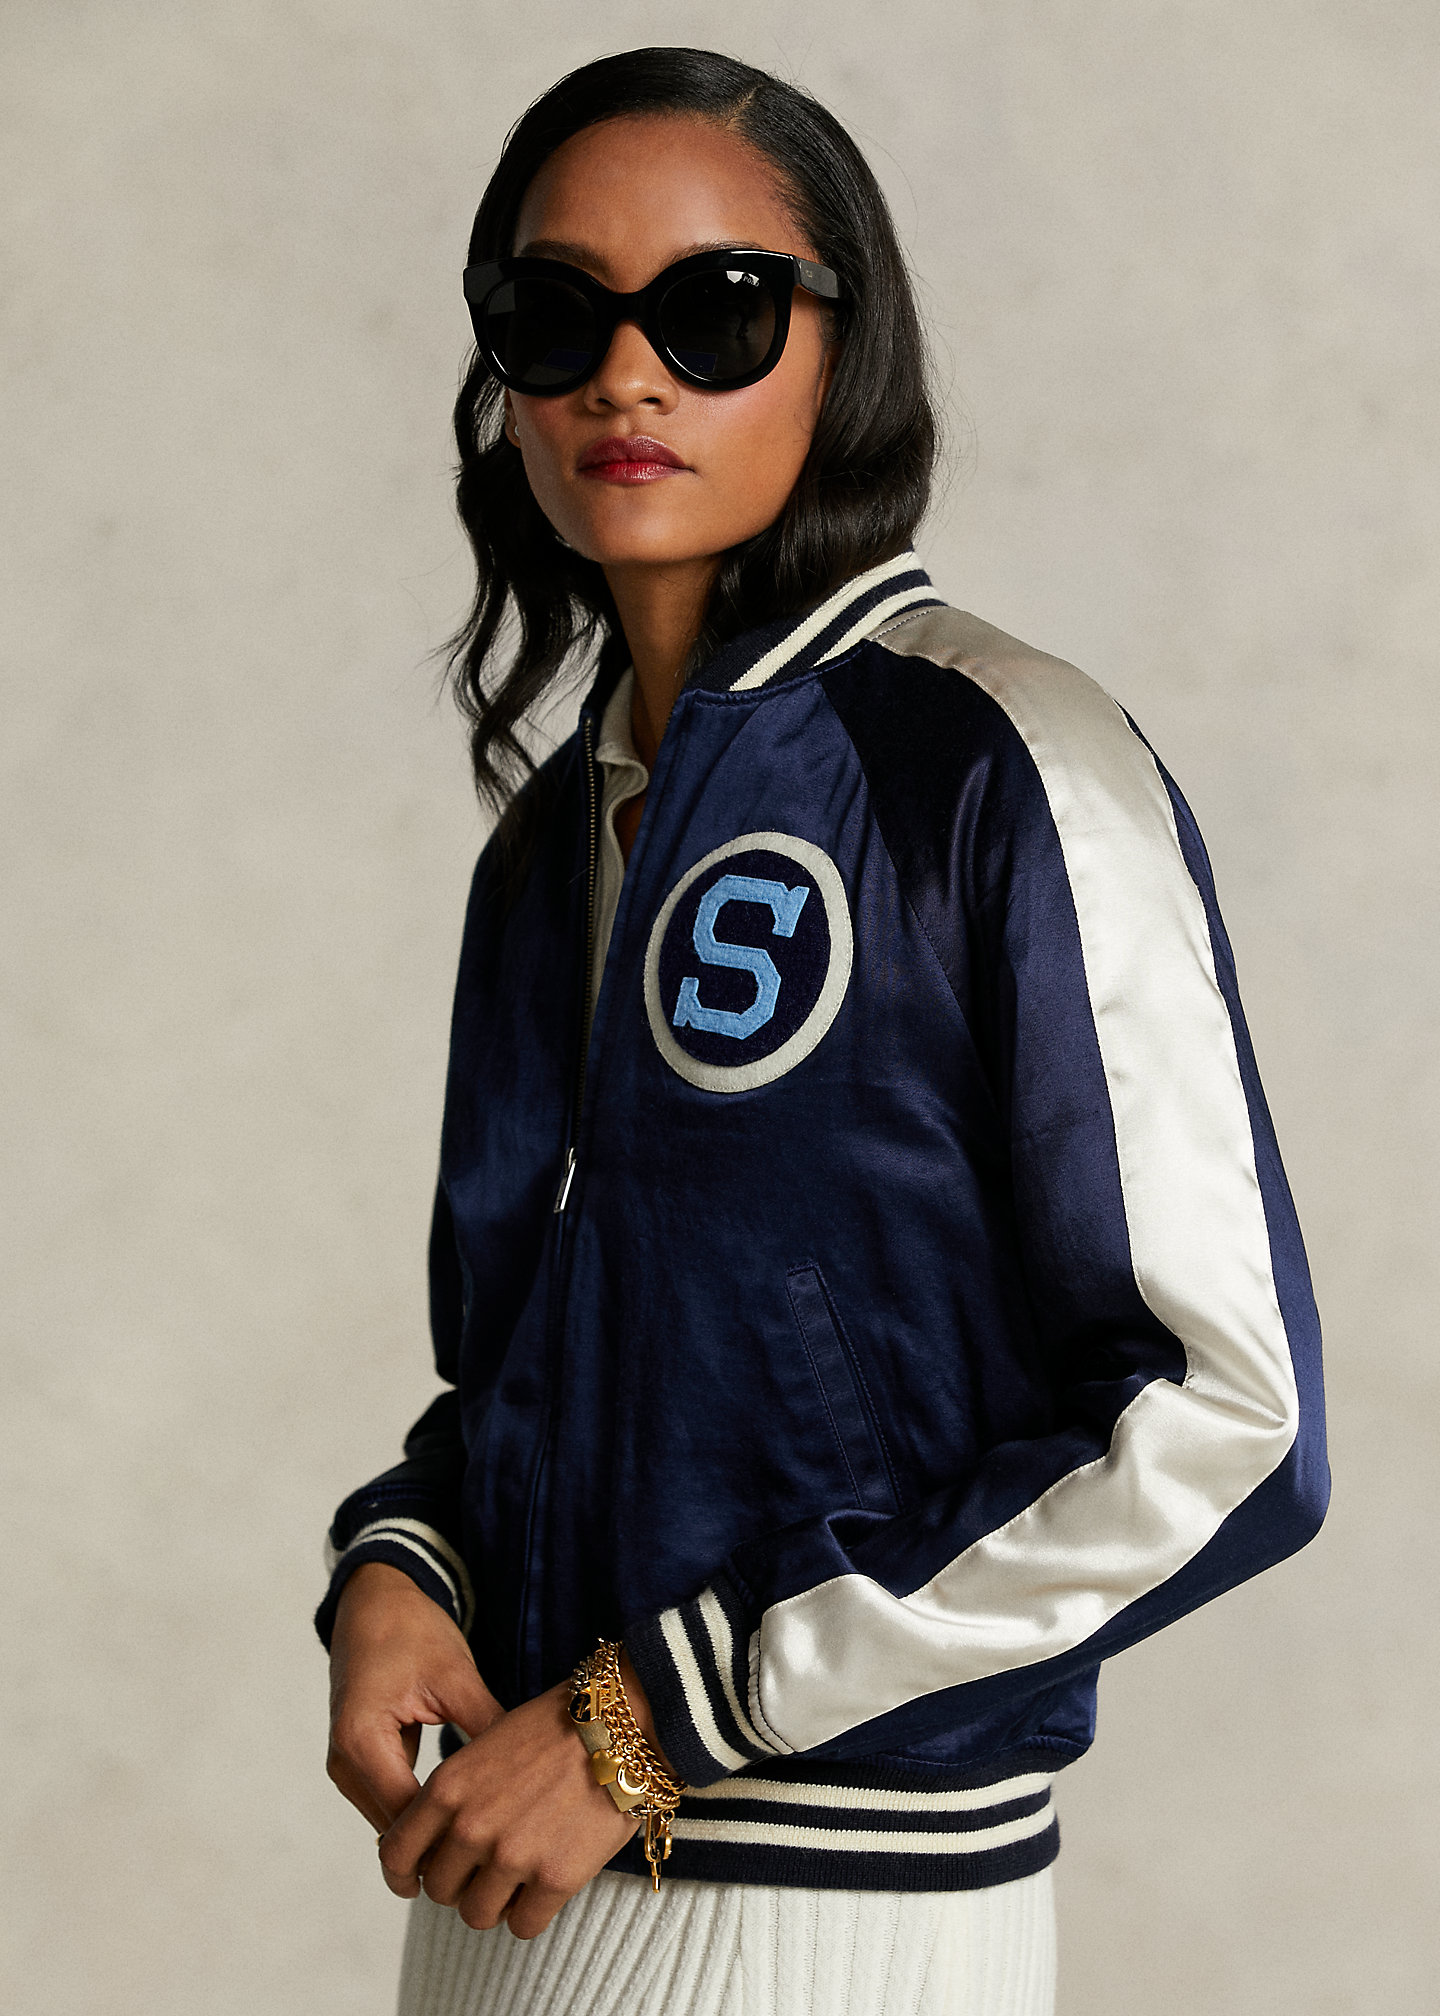 The Spelman Collection Bomber Jacket